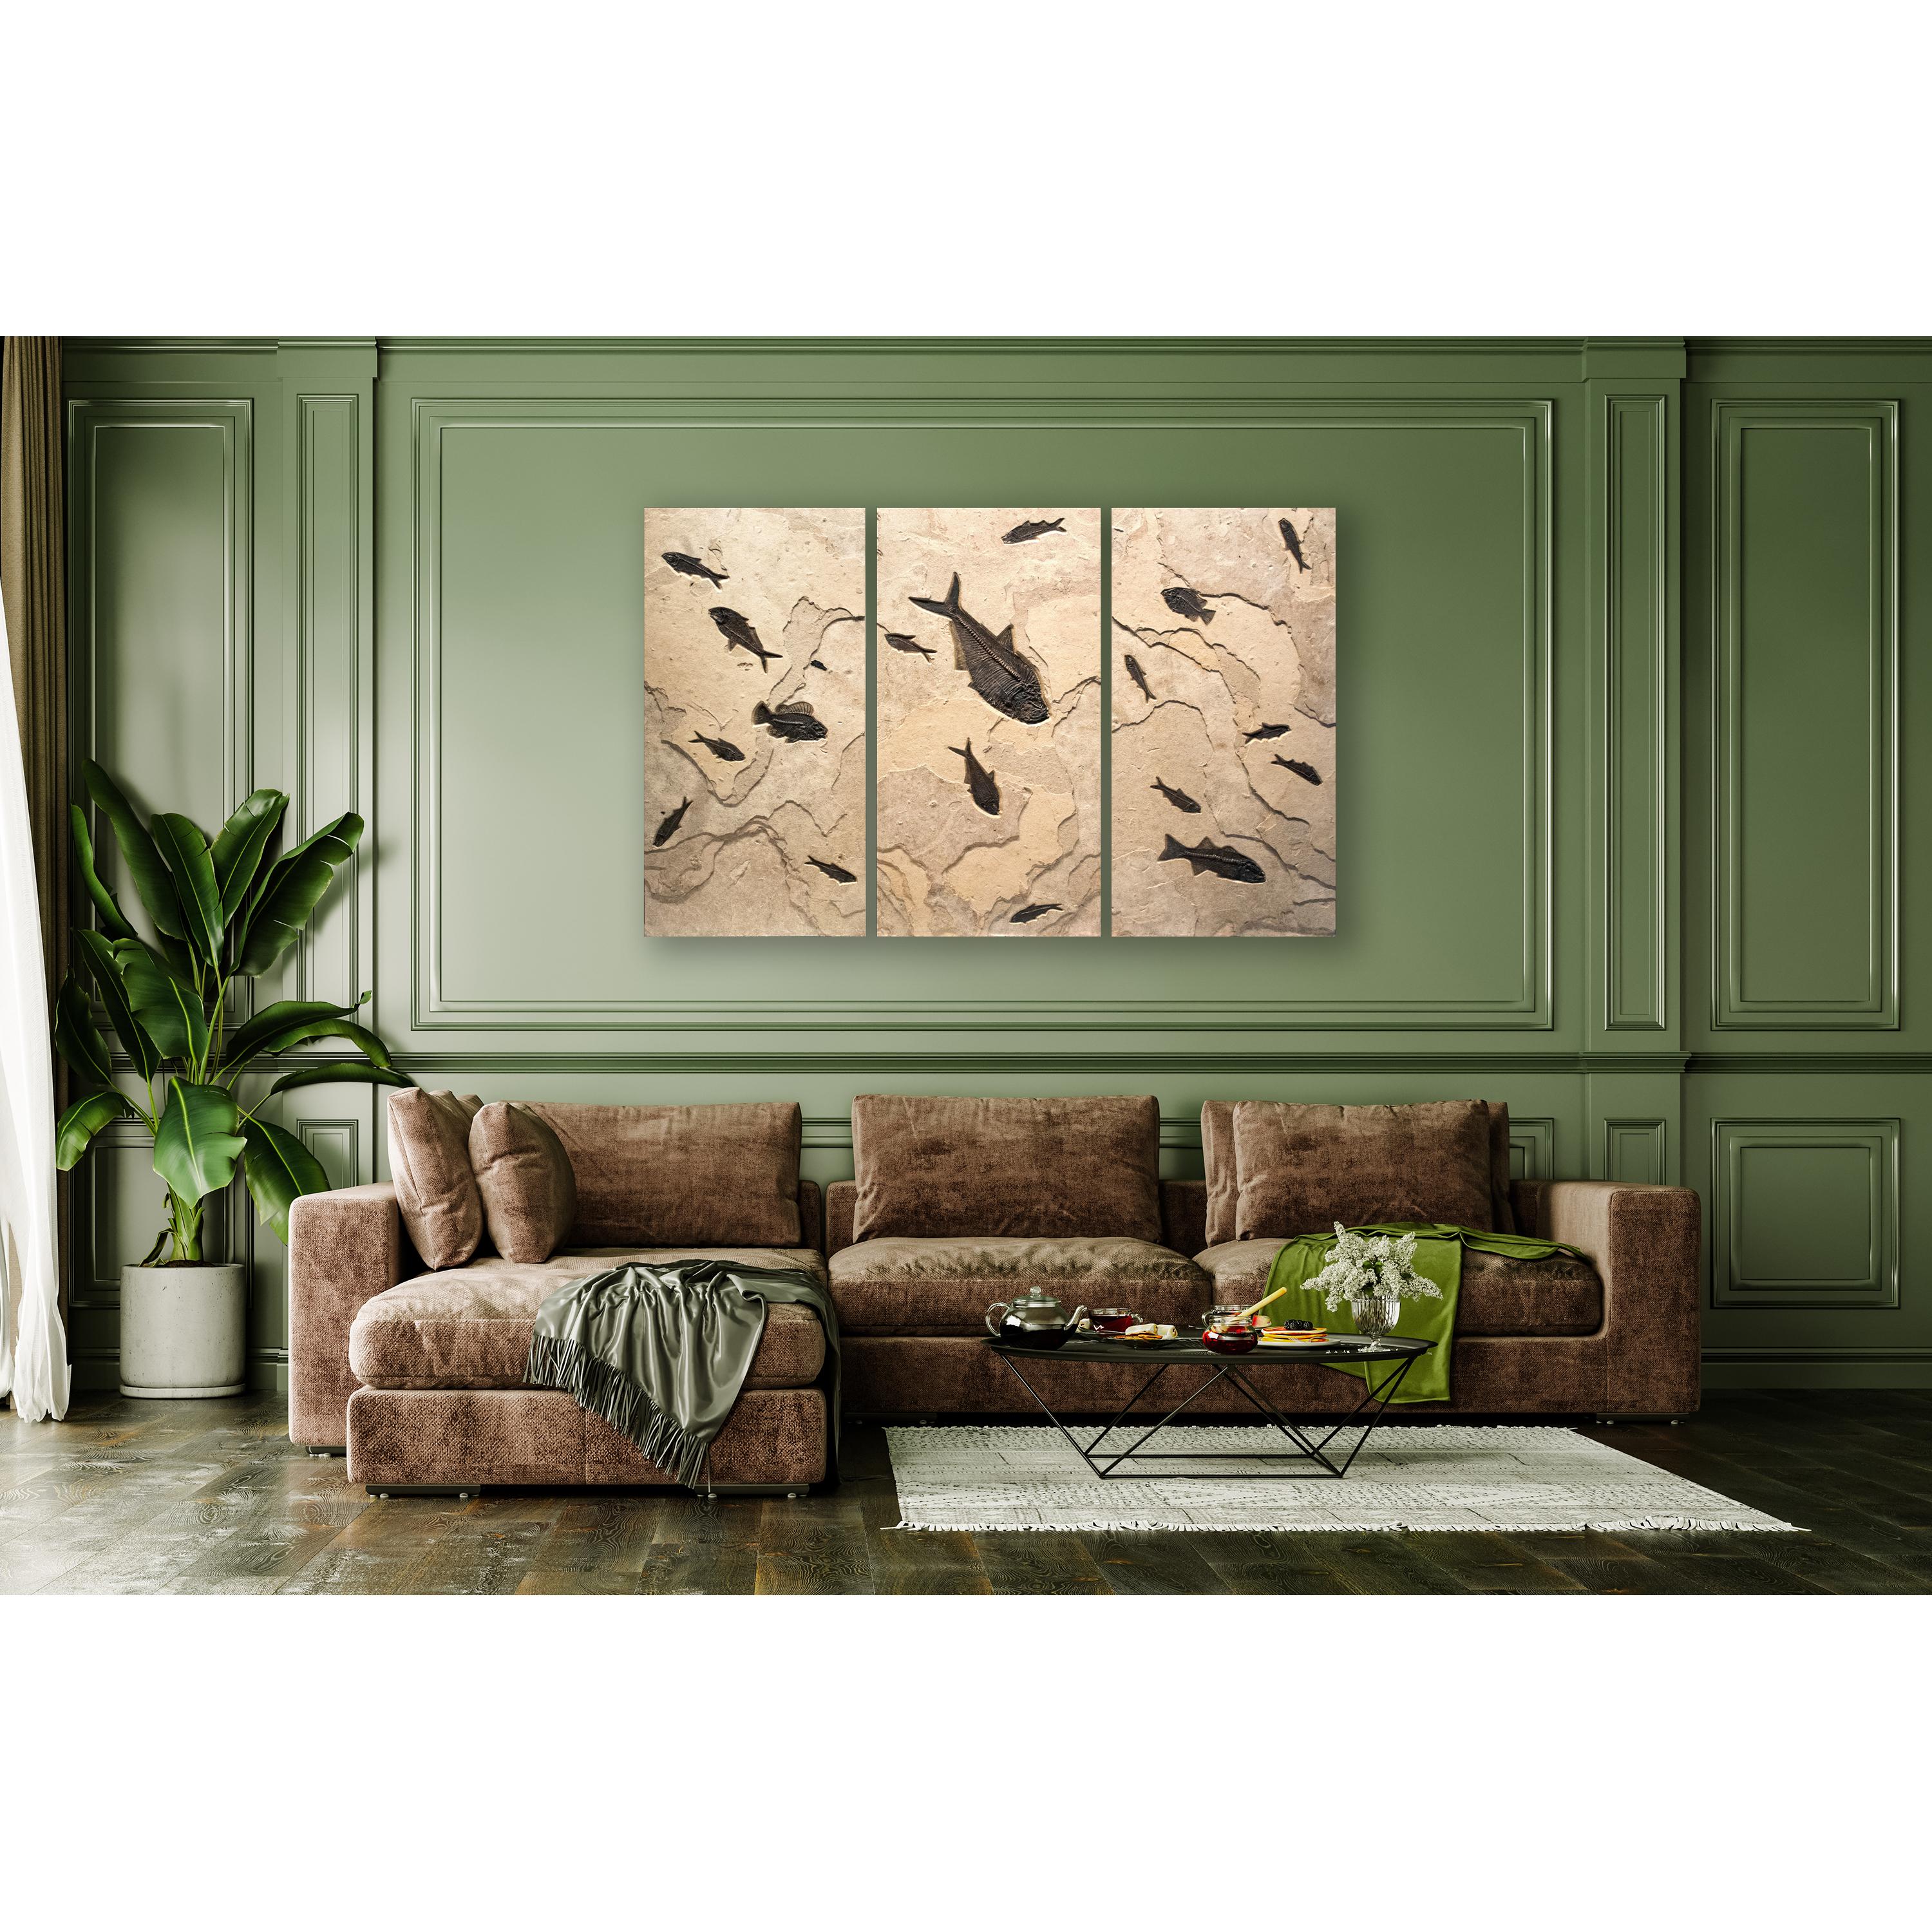 This exemplary slice of natural history compliments a wide range of design style, from traditional to rustic to modern. The contrast of sculptural limestone and the ancient fossils in this elegant stone triptych will be a dramatic focal point